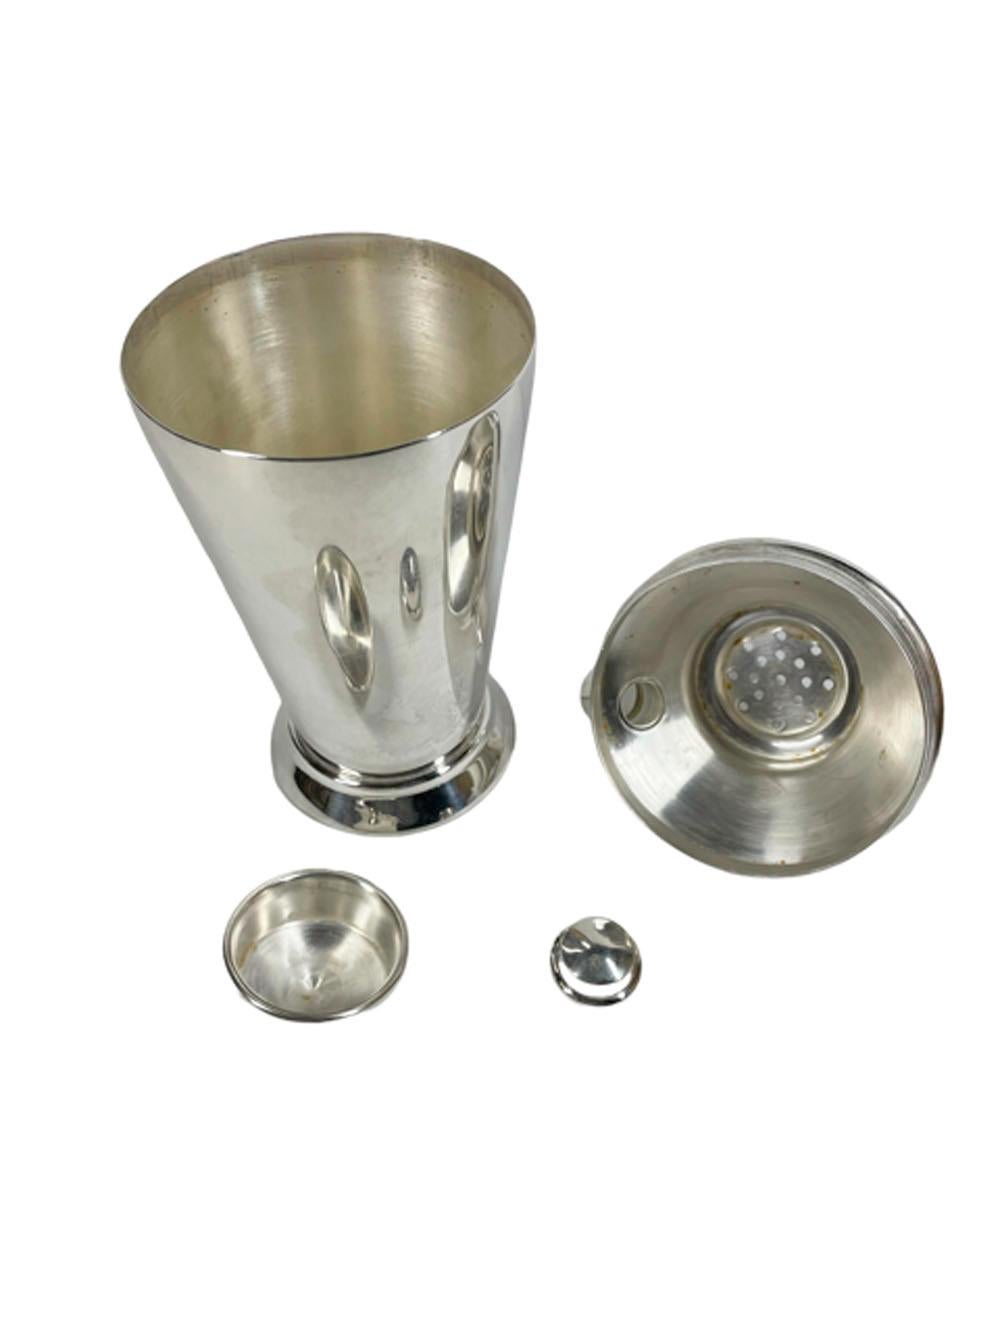 Art Deco Silver Plate Cocktail Shaker with Center Pour and Side Spout Lid For Sale 1